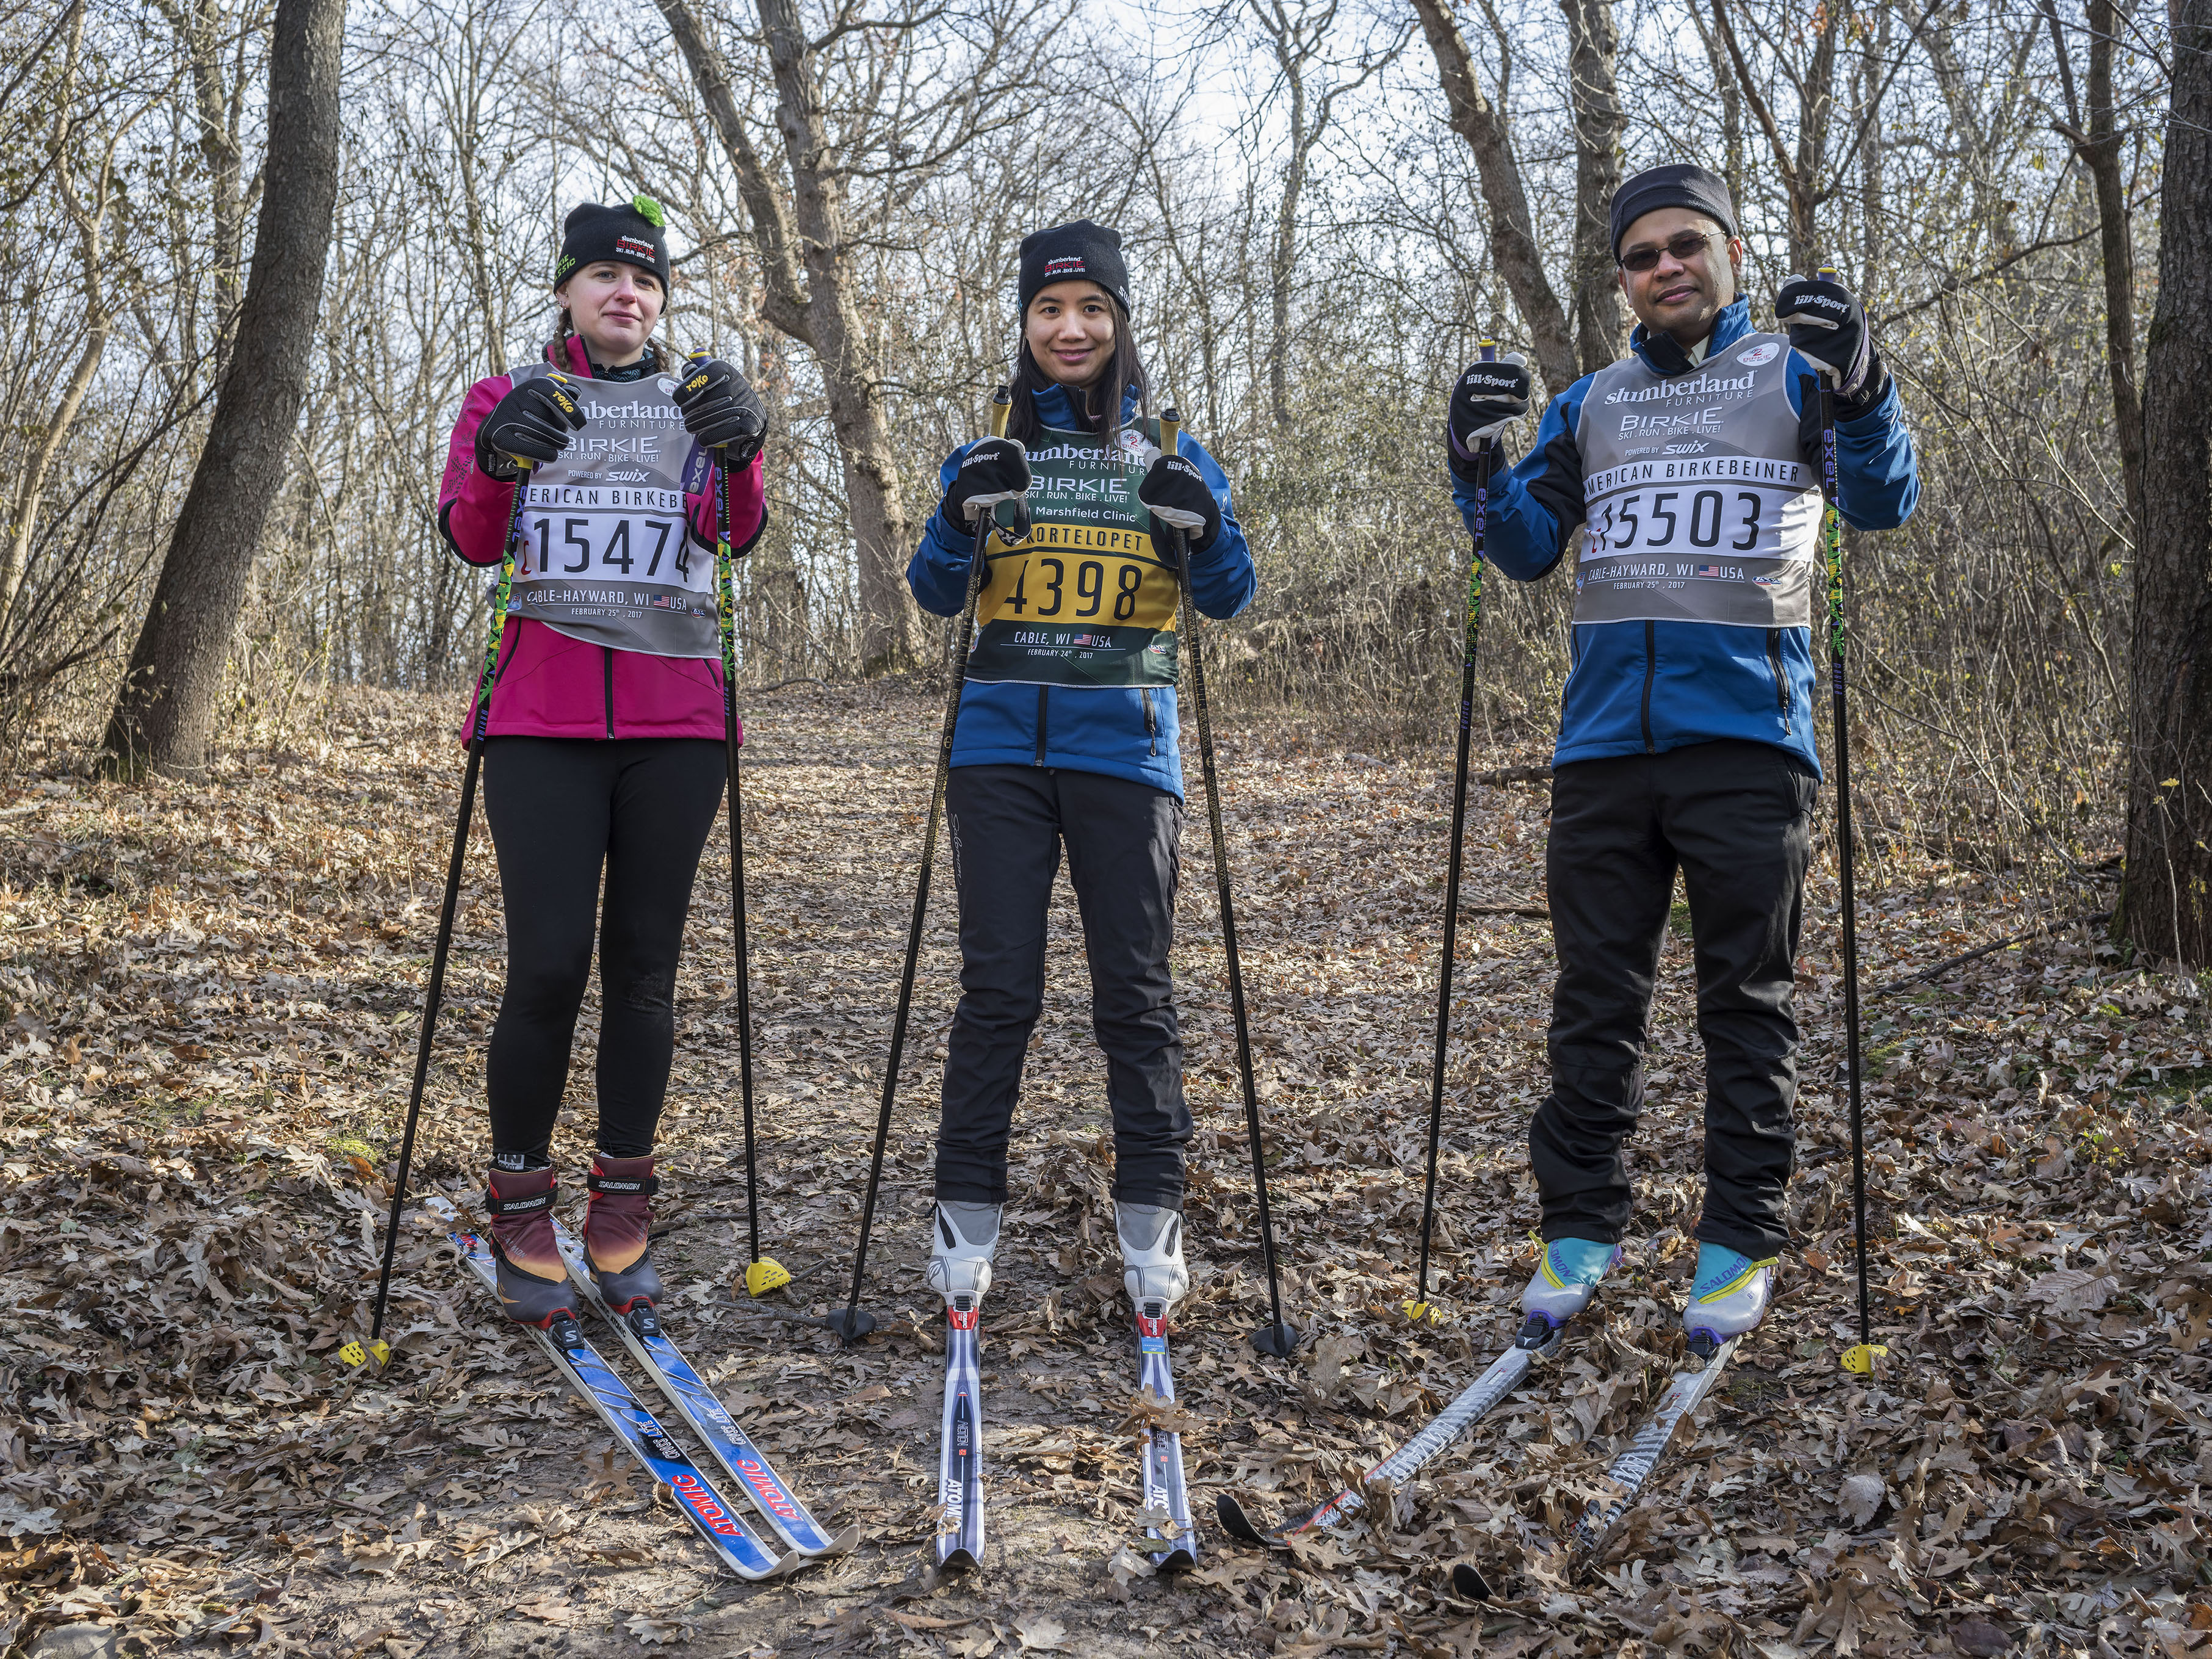 Three cross country skiers stand in a snowless woods dressed in race bibs 